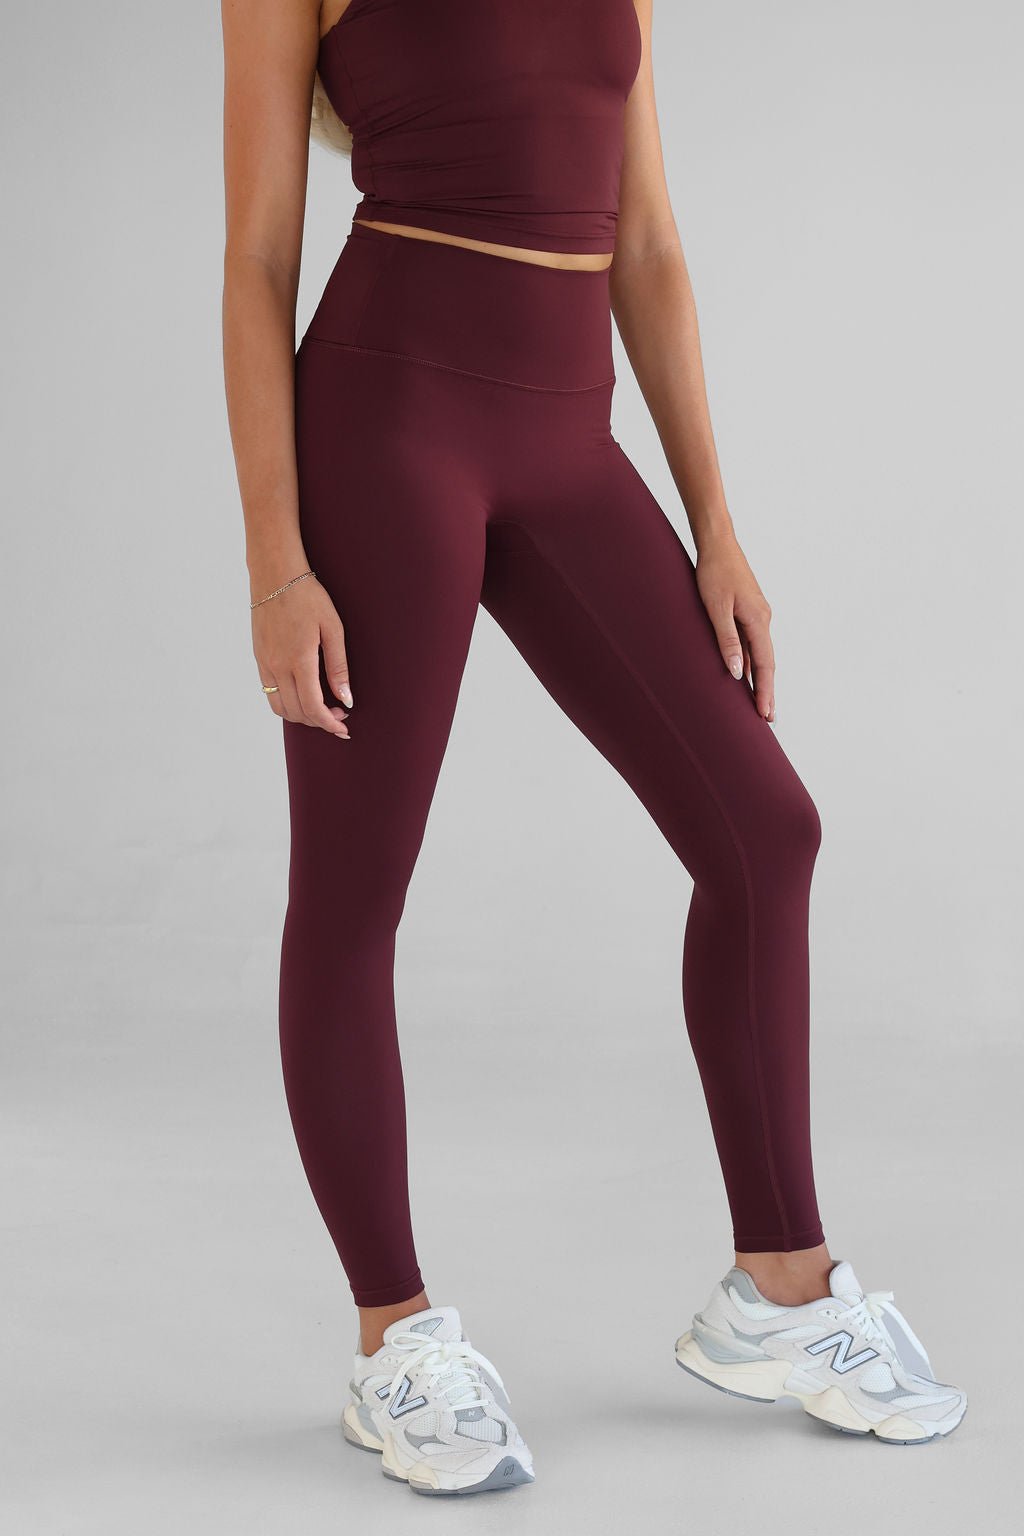 SCULPT Full Length Leggings - Cherry Cola SHIPPING FROM 12/02 - LEELO ACTIVE